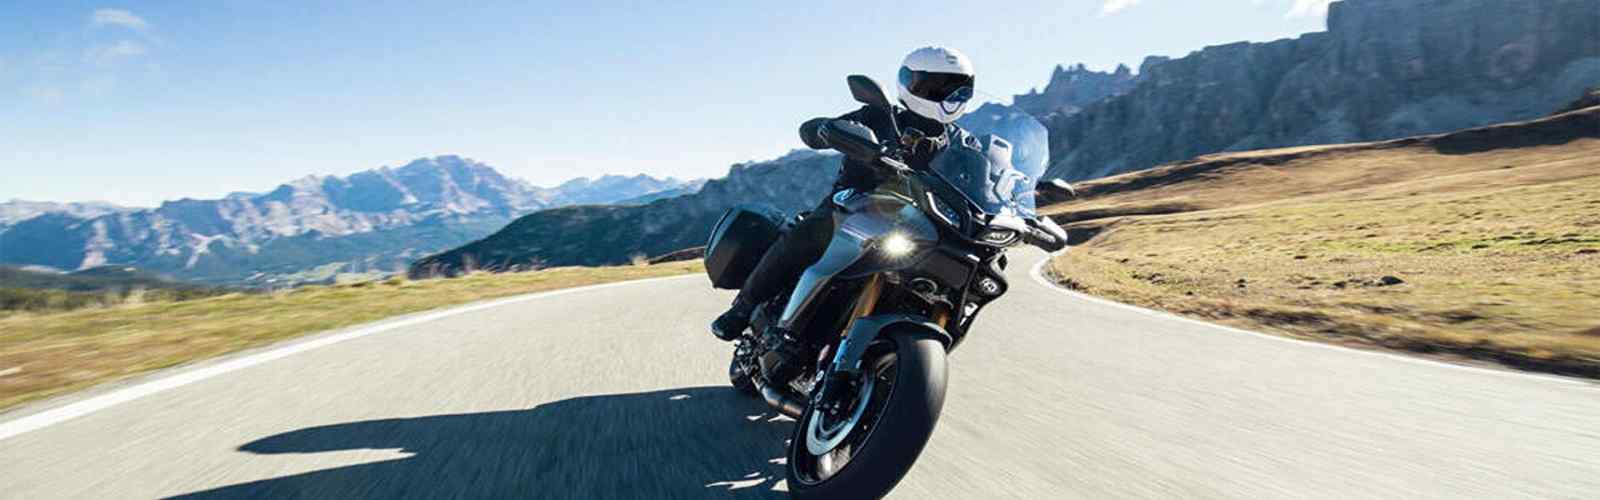 Motorcycling the Transfagarasan road from south to north